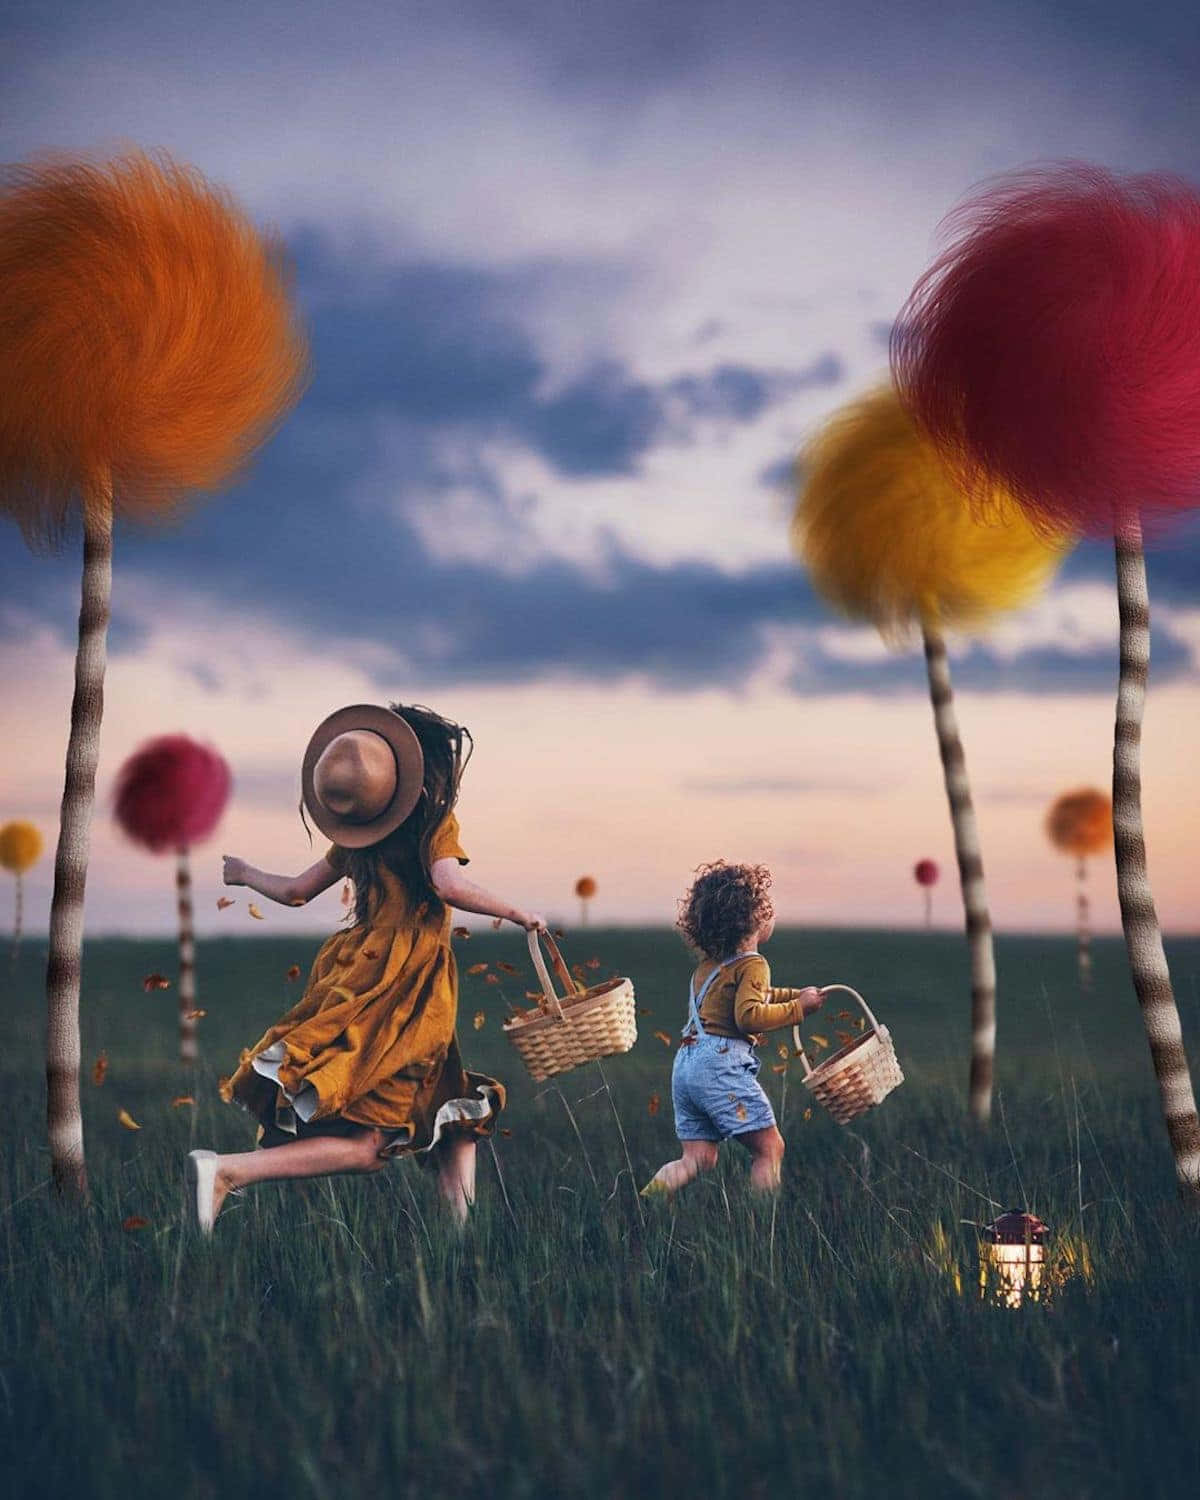 two children are running in a field with colorful pom poms